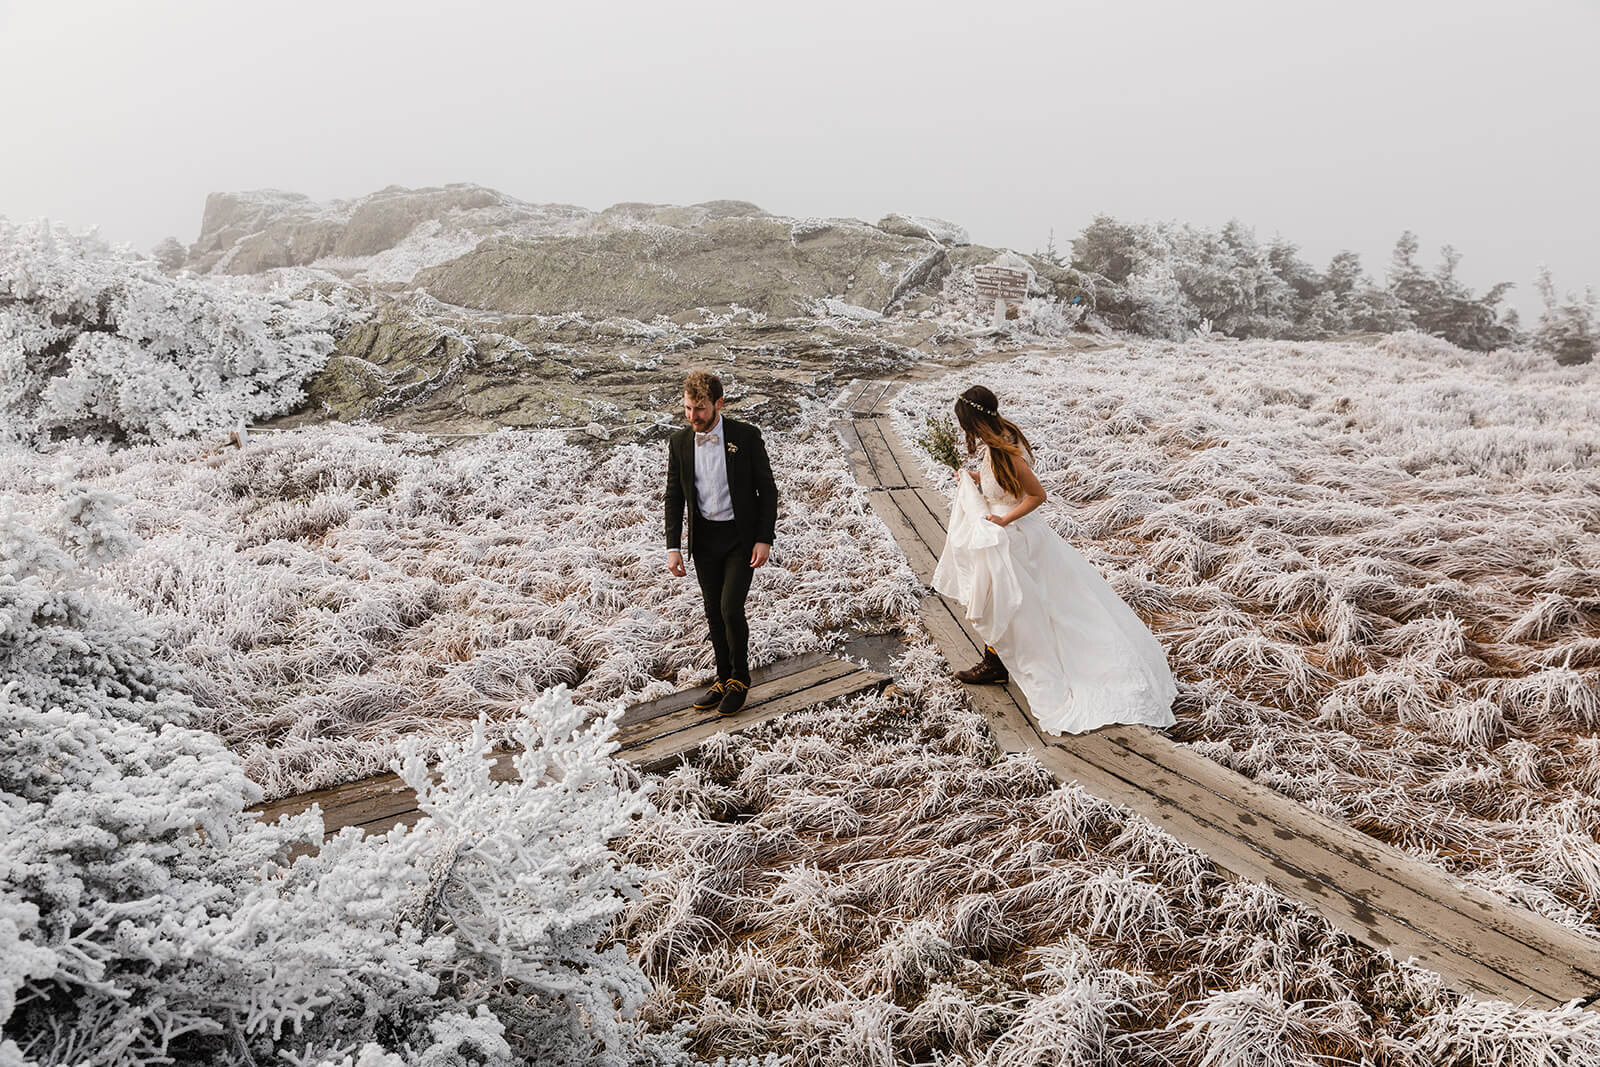  Eloping couple enjoys first look in frosty conditions during their adventure elopement on Mt. Mansfield, Vermont’s tallest mountain.  Vermont mountain wedding. Vermont winter elopement. Vermont elopement packages. 